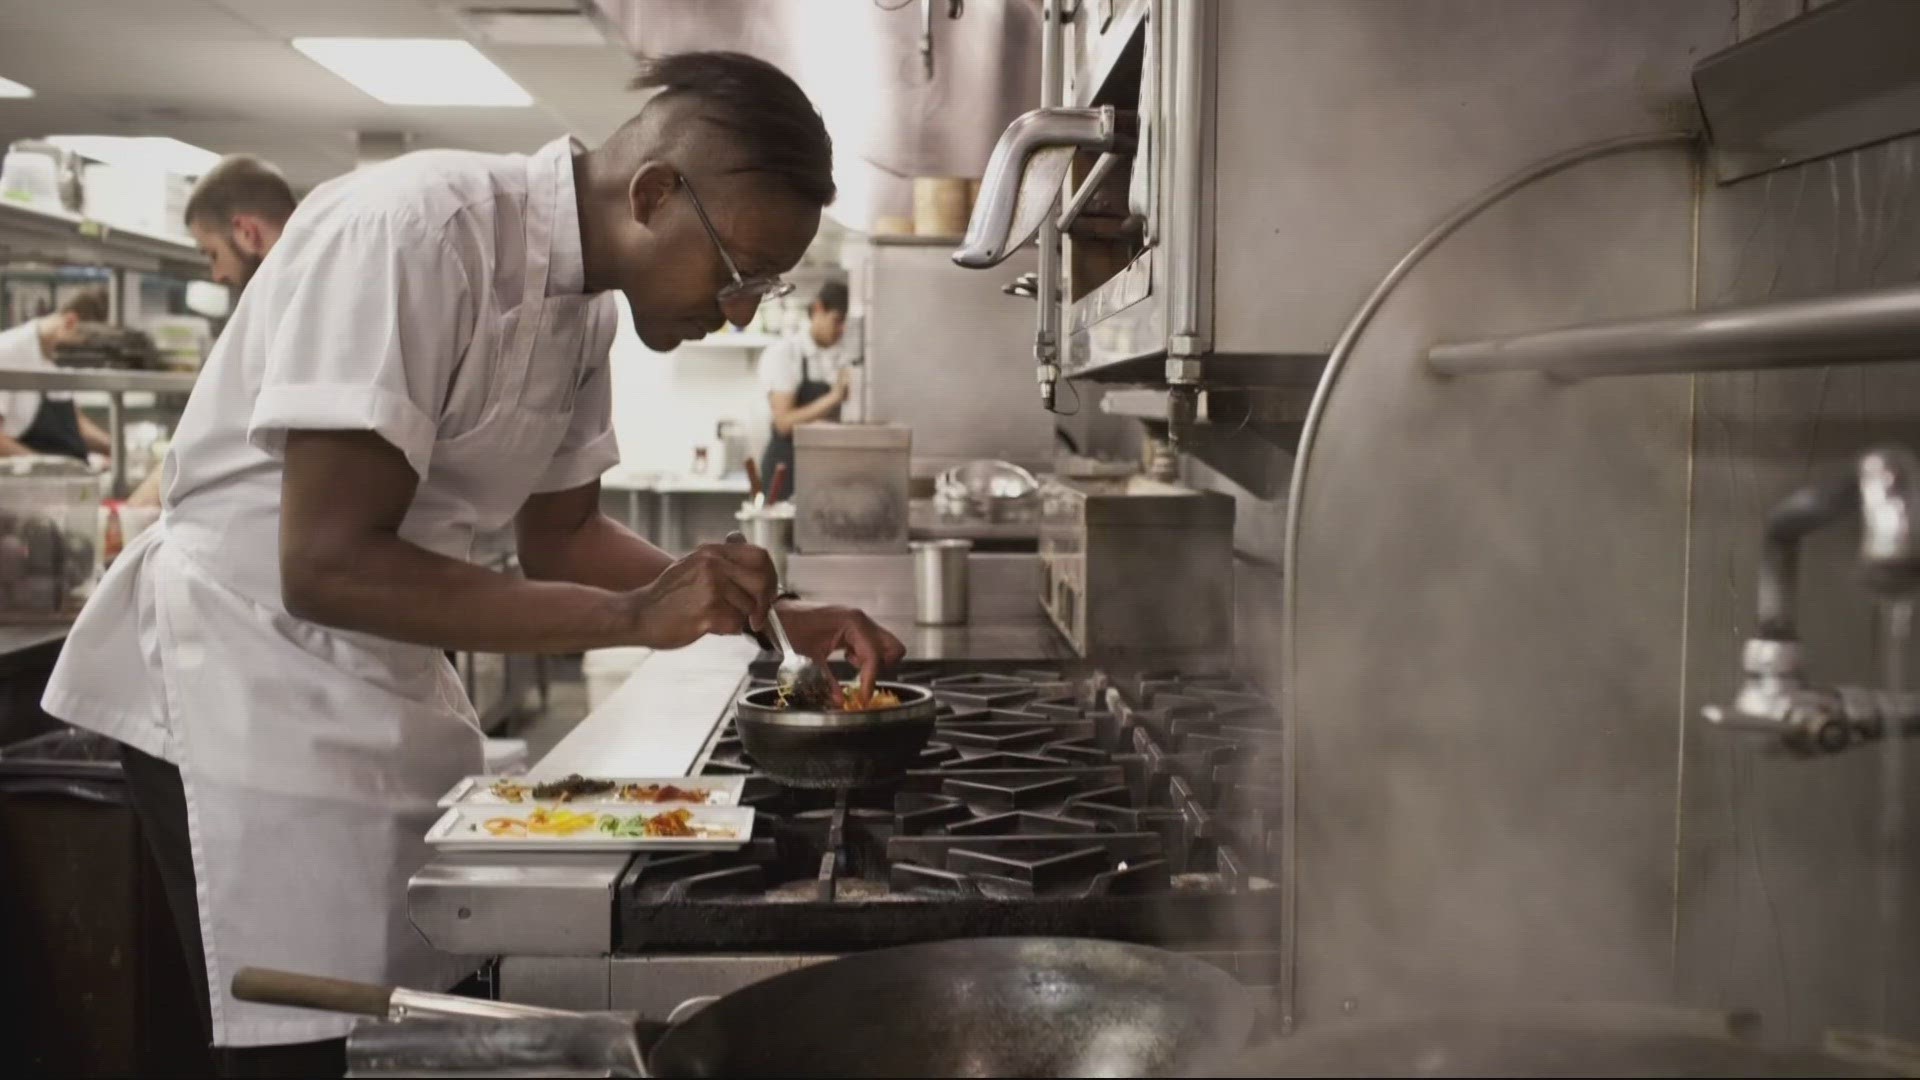 Gregory Gourdet is a local chef that has become one of the biggest names in the food industry. He has been on "Top Chef" and won a James Beard Award.